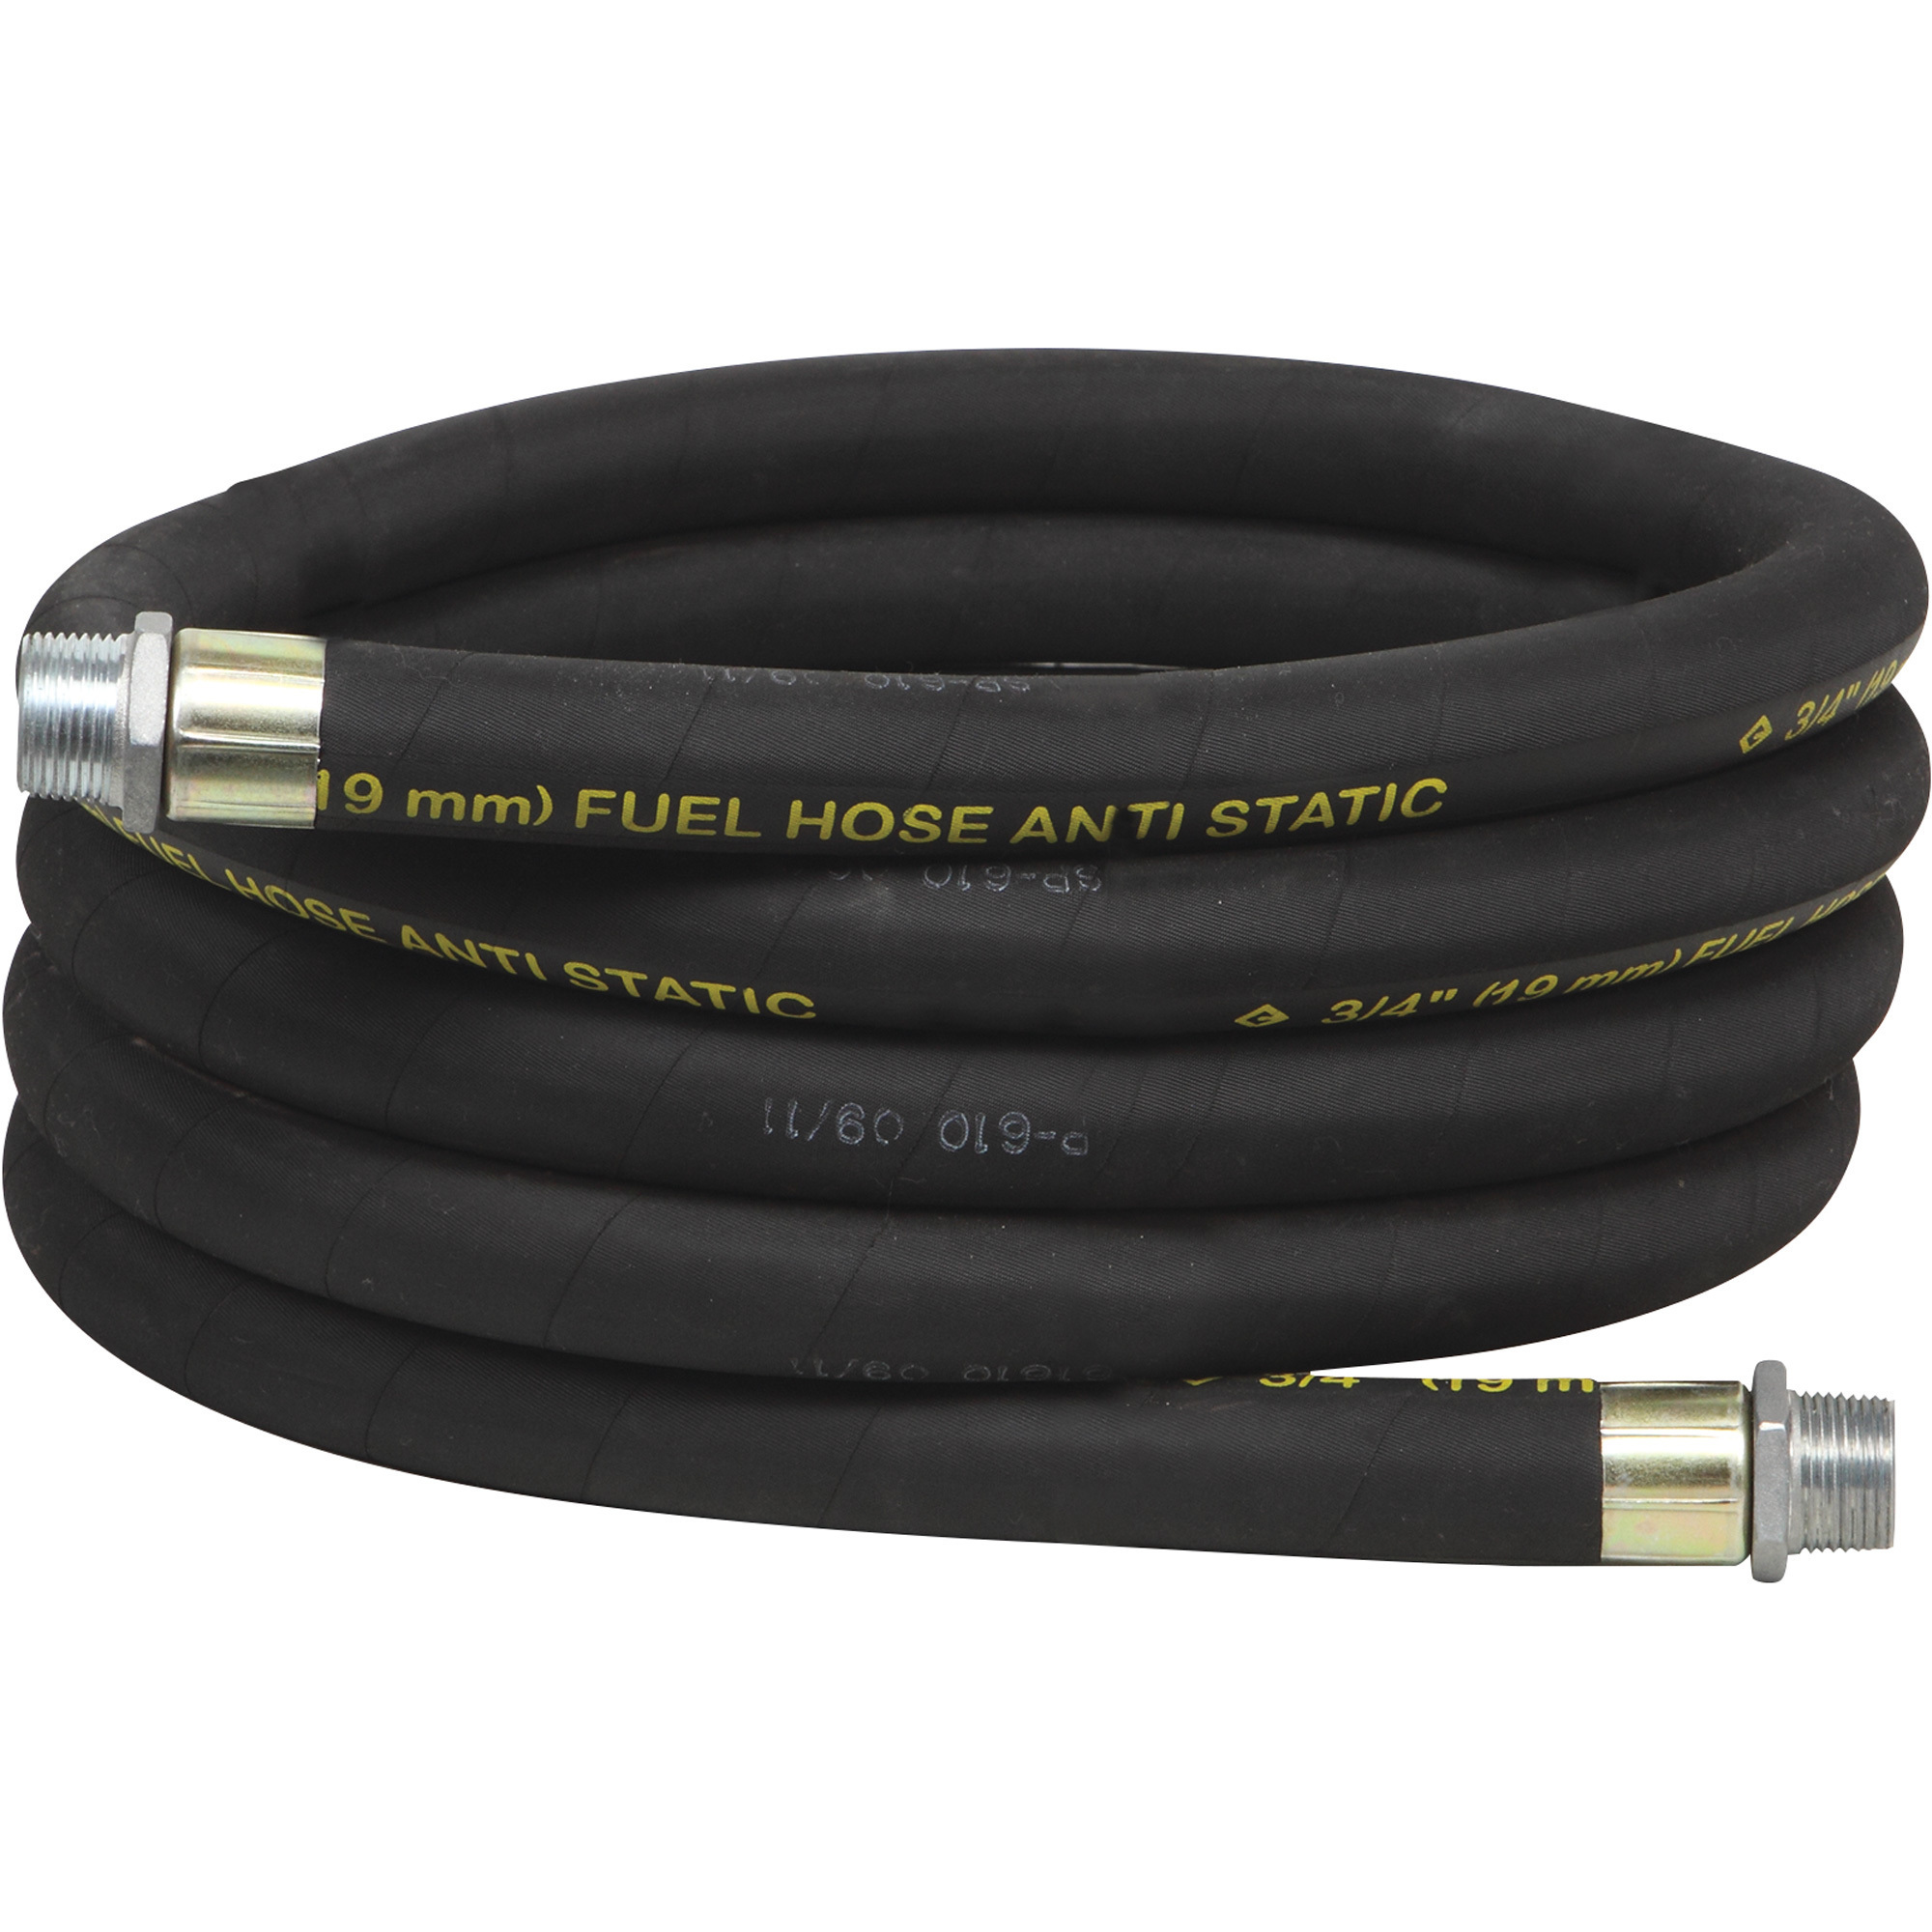 Roughneck Antistatic Grounded Fuel Hose, 1Inch x 20ft.